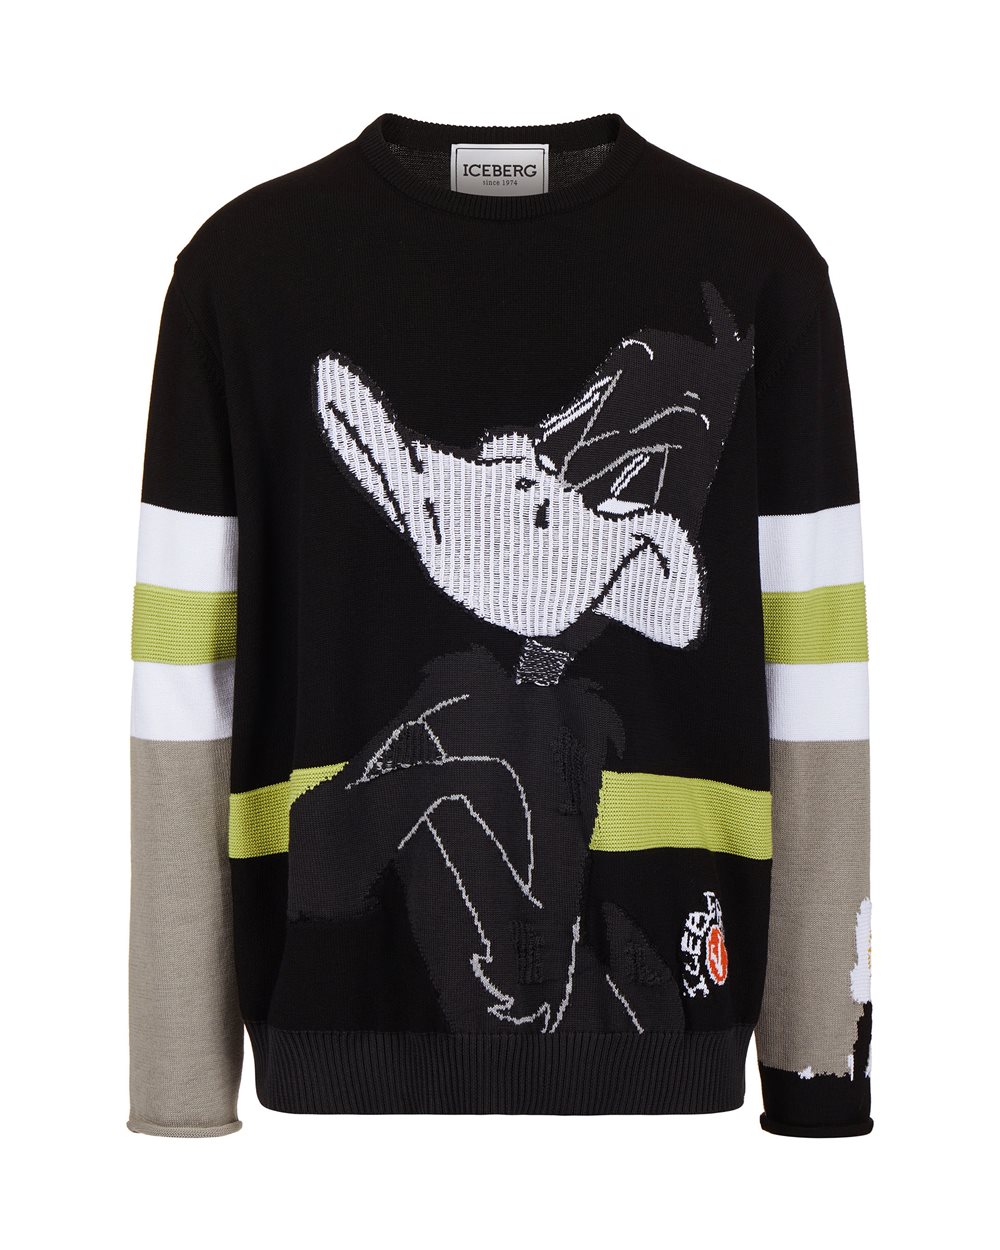 Sweater with cartoon graphics and logo - VAMEE SELECTION | Iceberg - Official Website